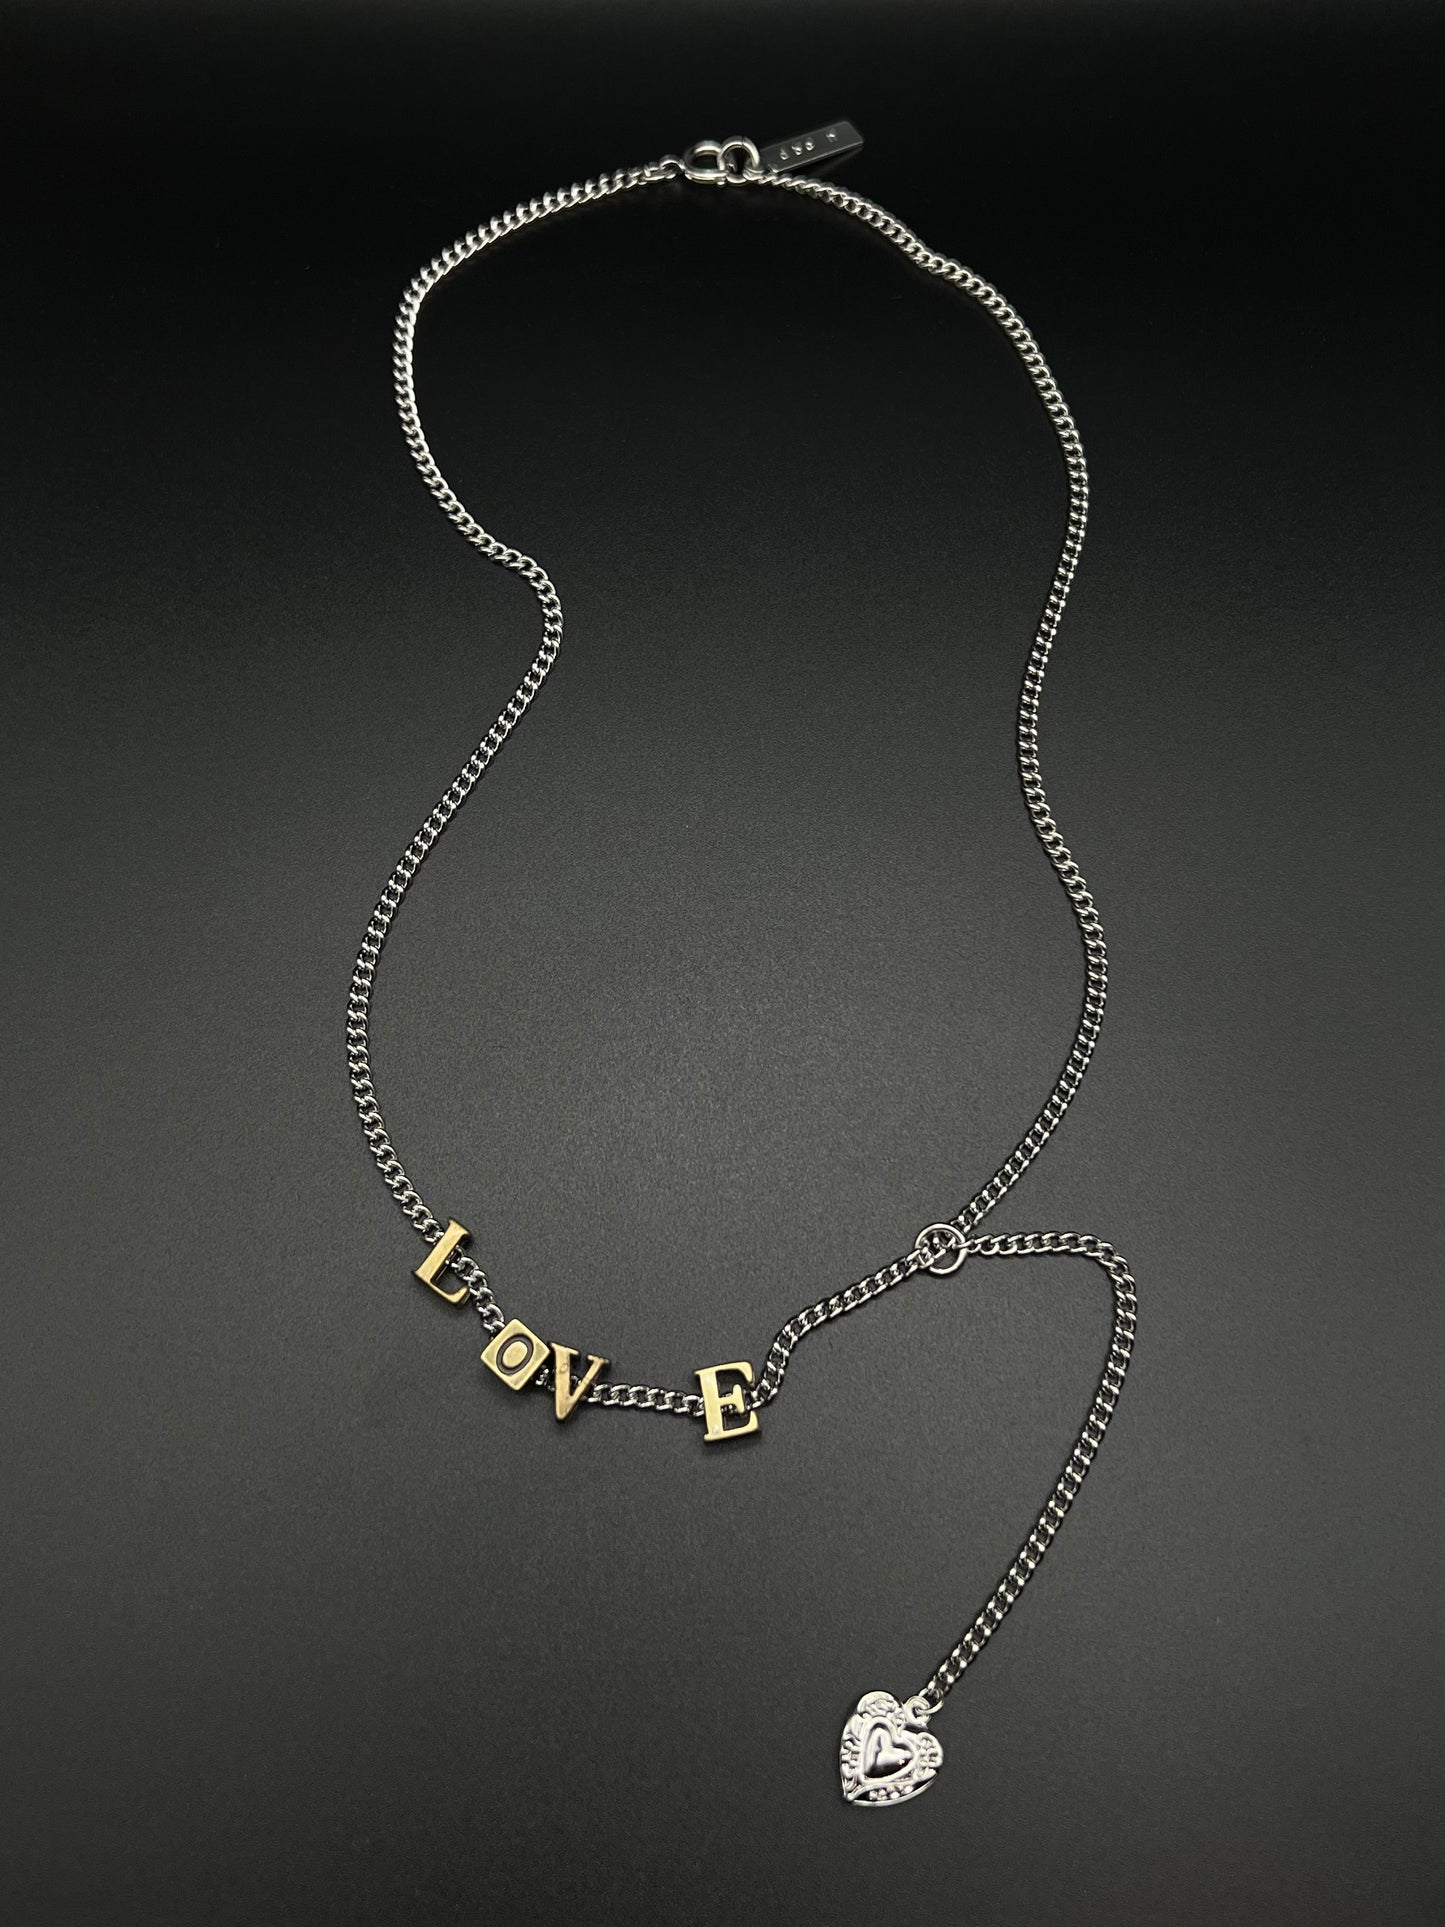 "LOVE" necklace